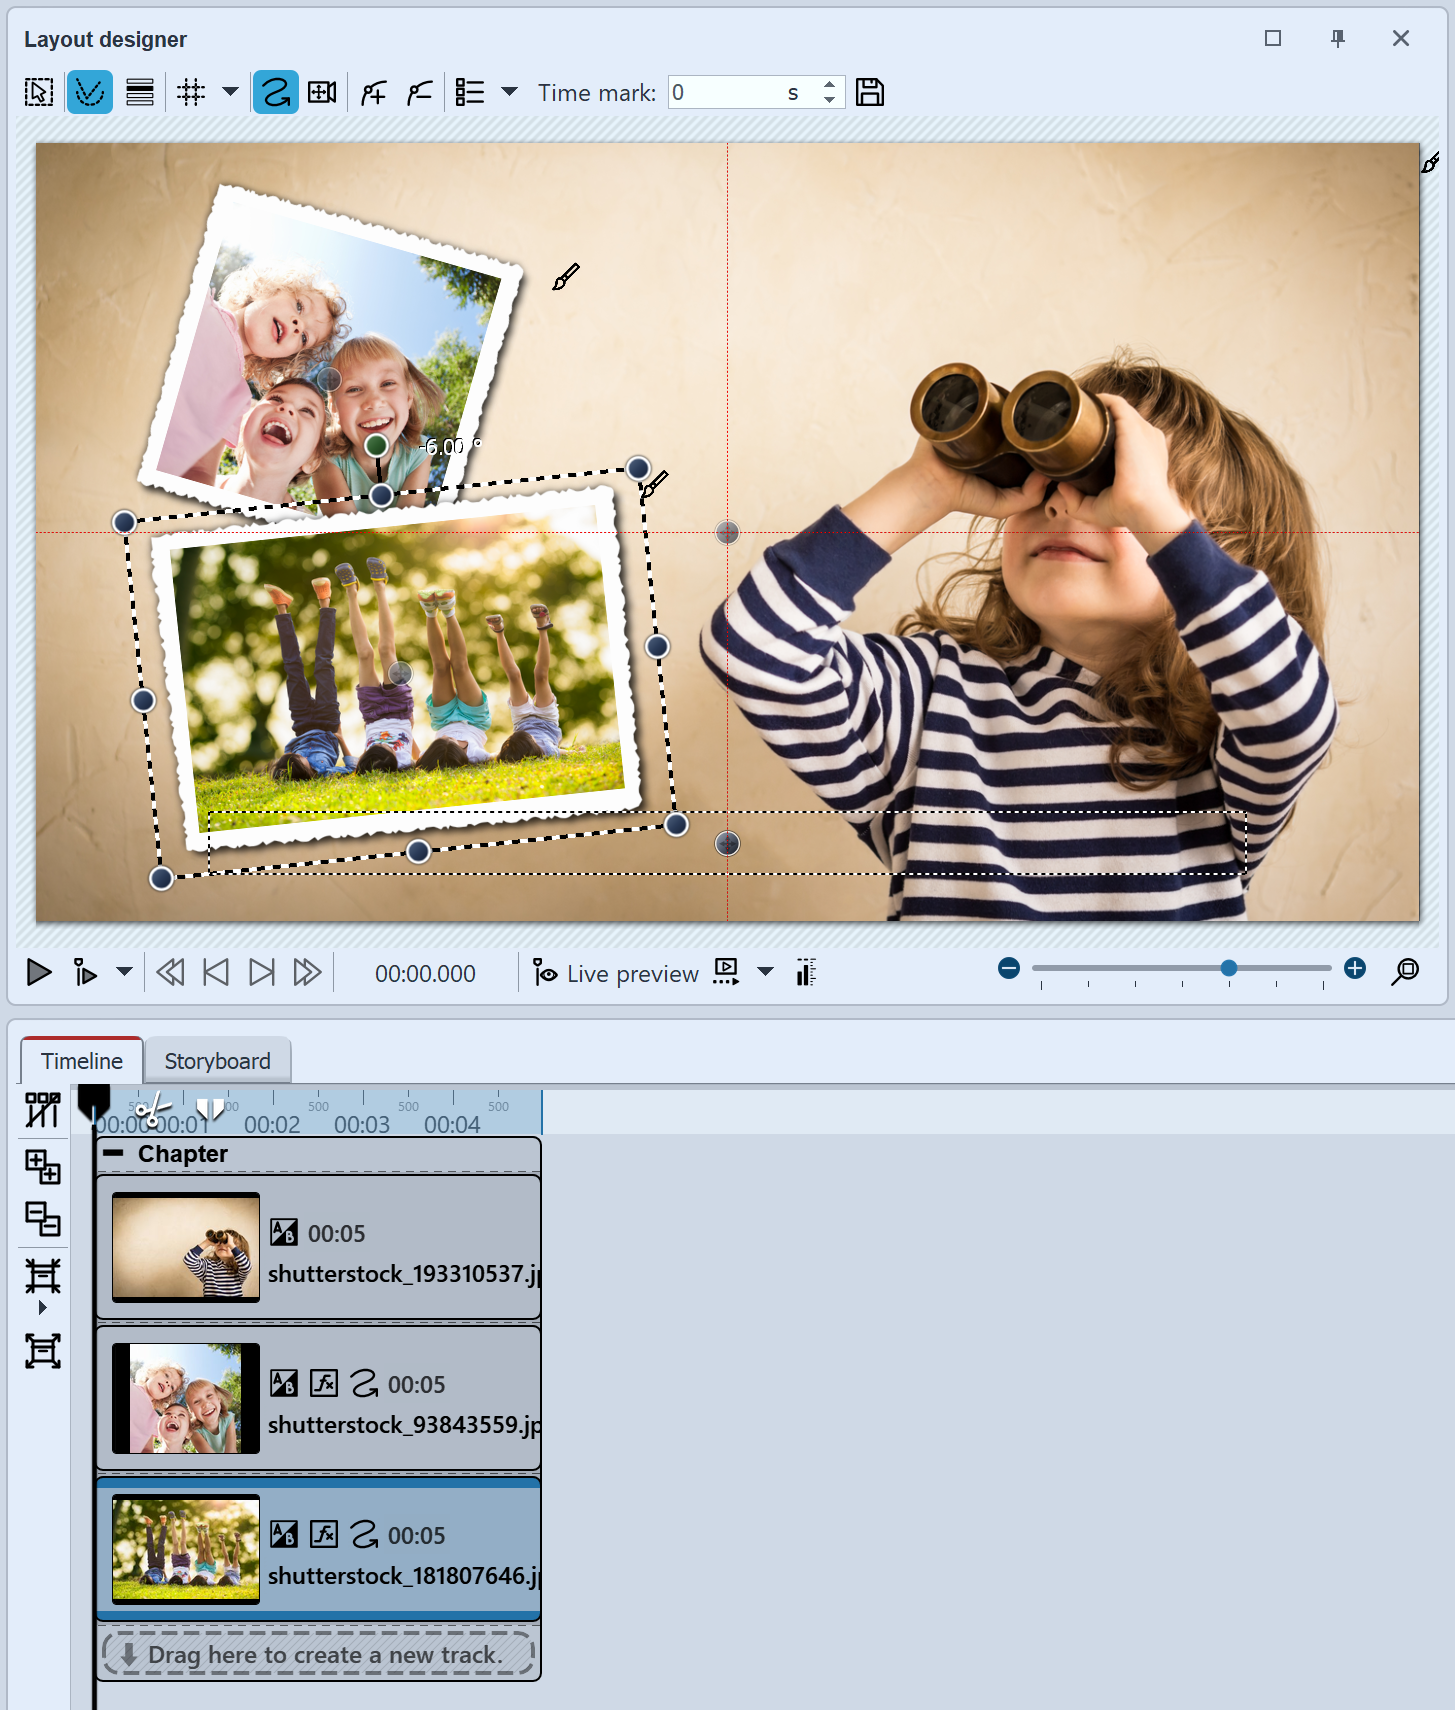 Creating a picture-in-picture effect in the Layout designer